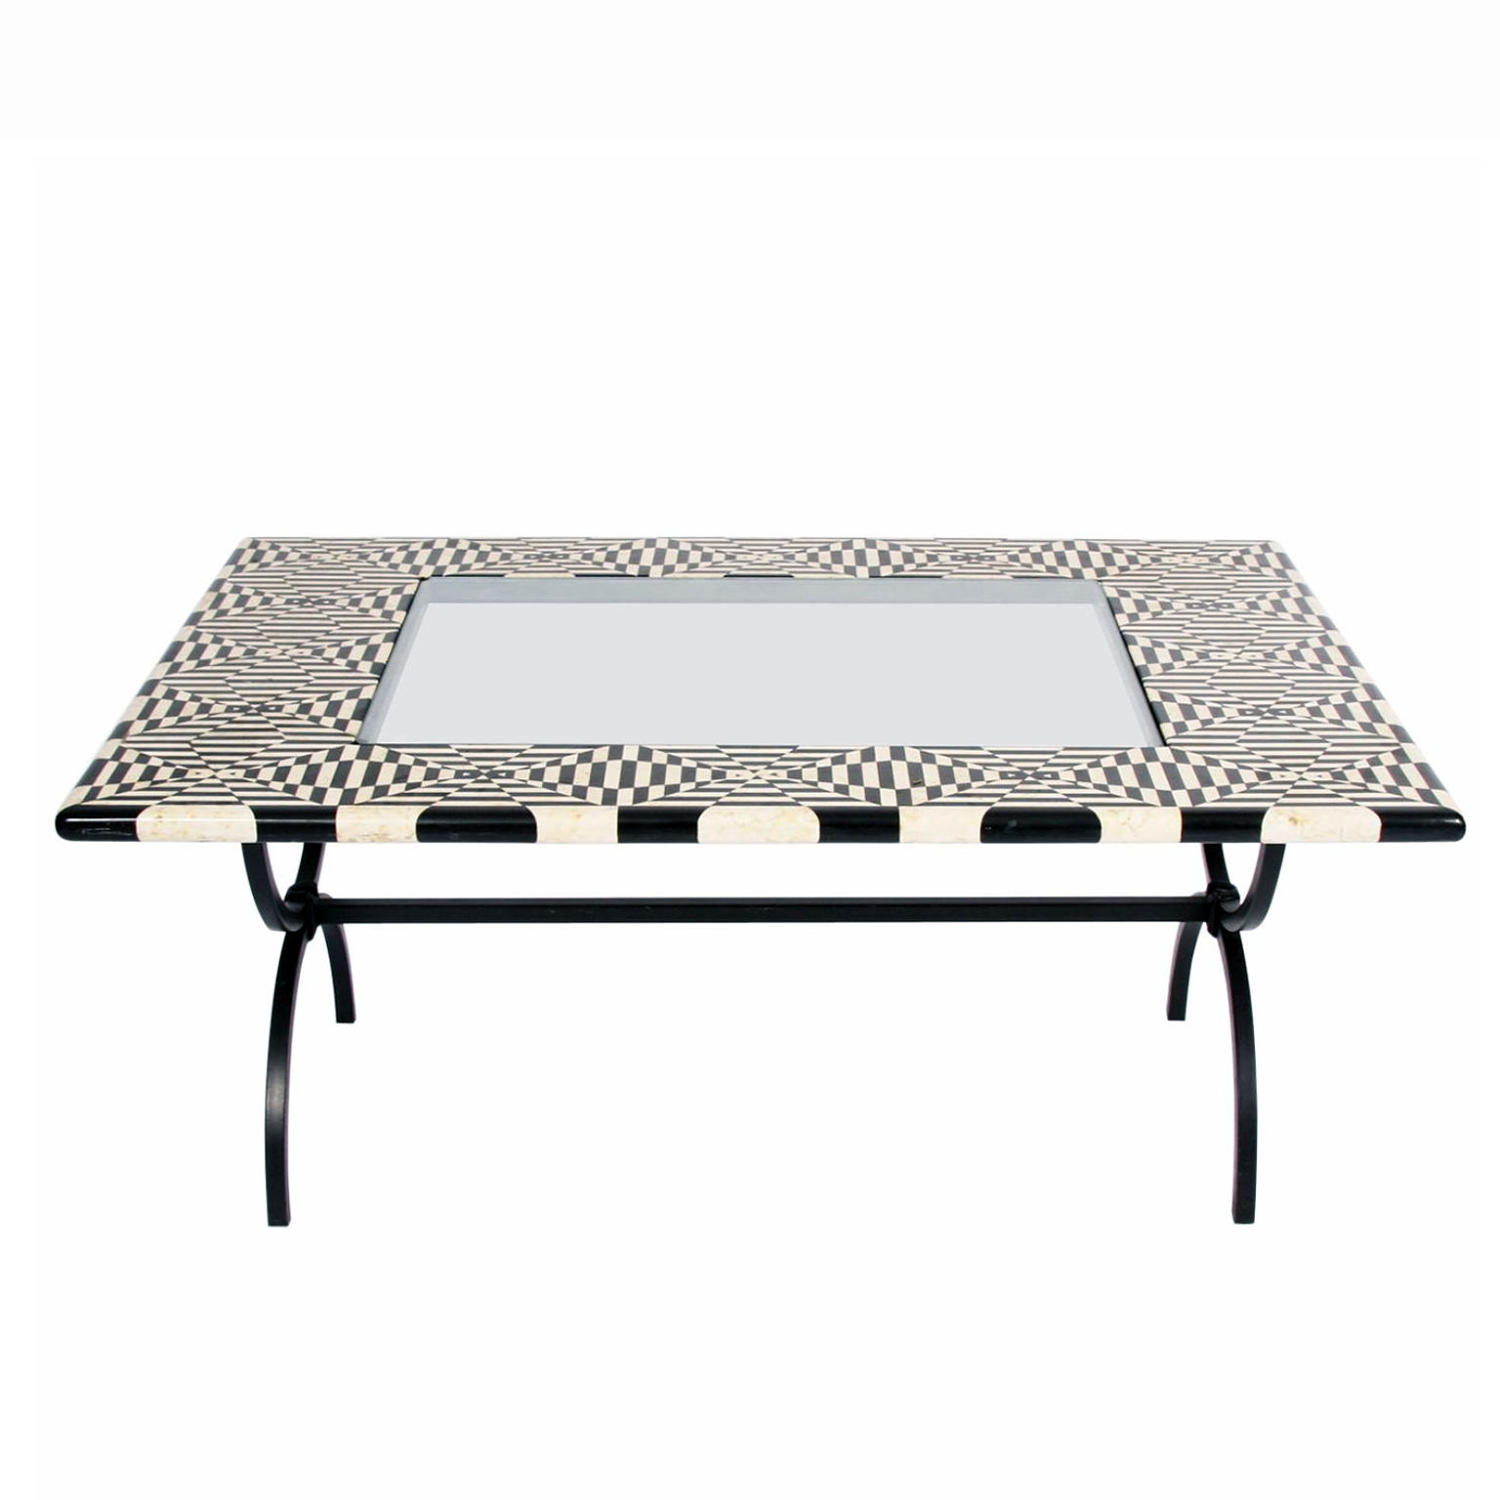 1980s Black and White Marble Top Table